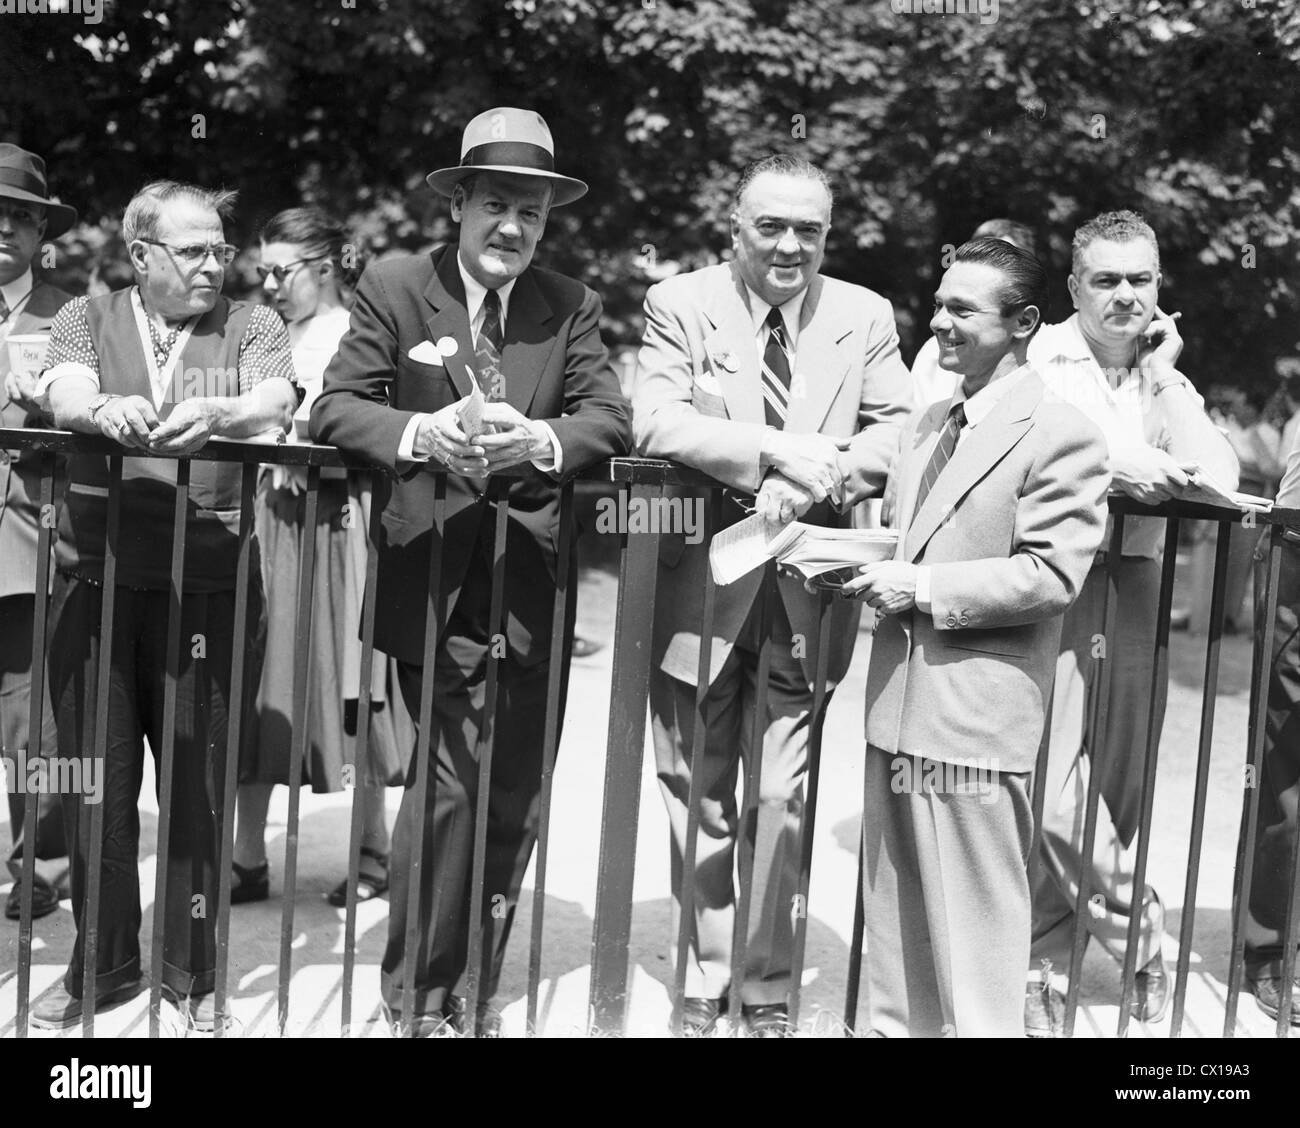 Clyde Tolson, J. Edgar Hoover and Sam Wm. Renick at Belmont Park Race Track, NY June 6, 1953 Stock Photo